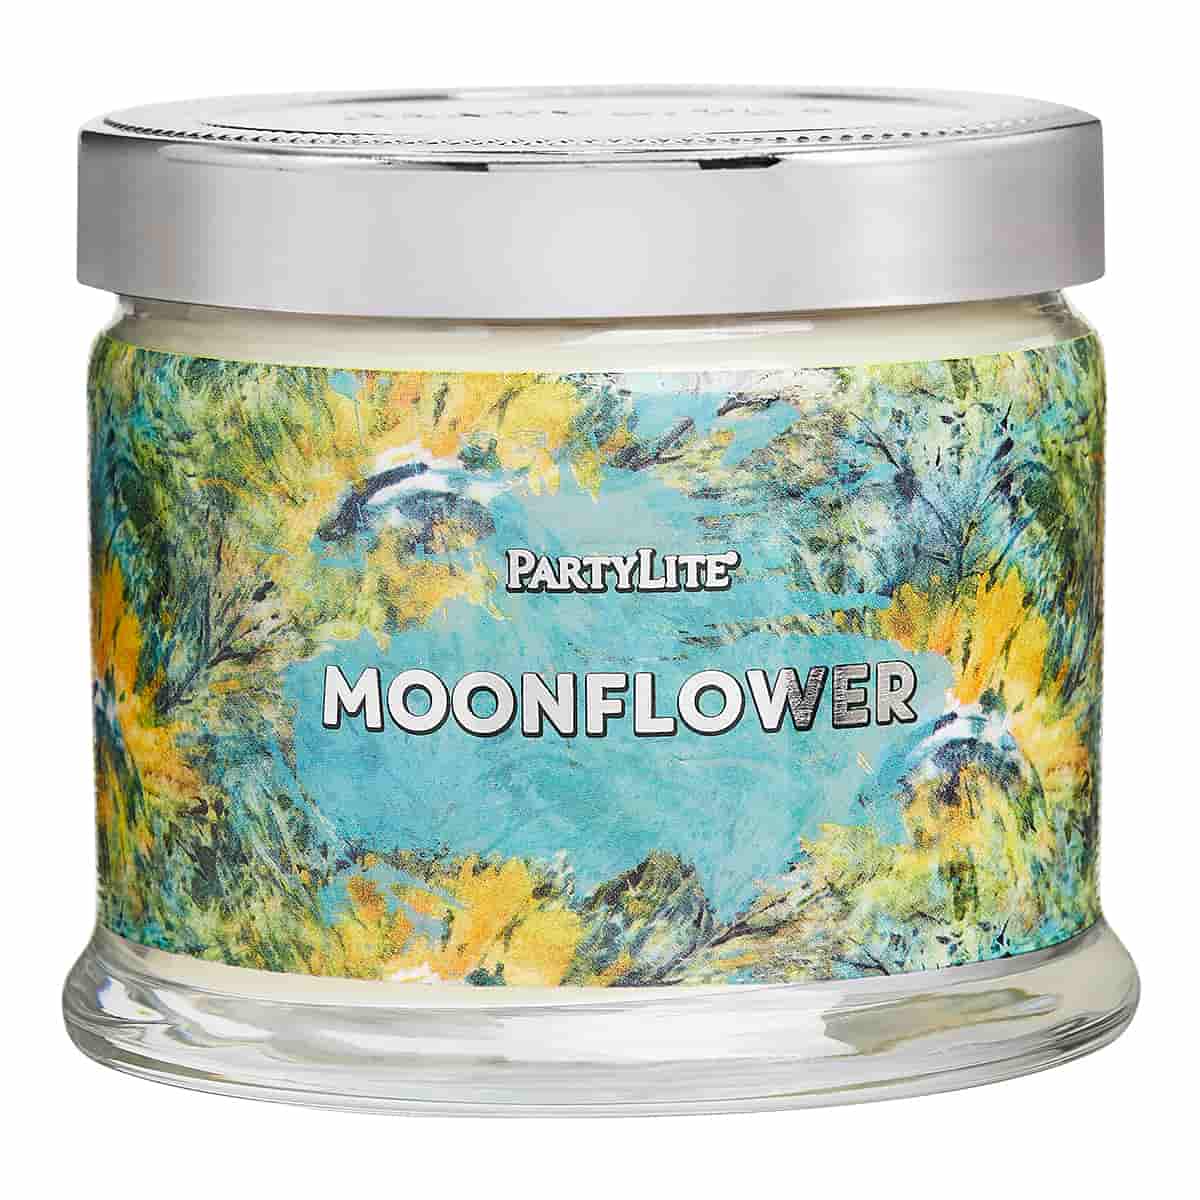 Moonflower 3-wick Jar Candle - PartyLite US